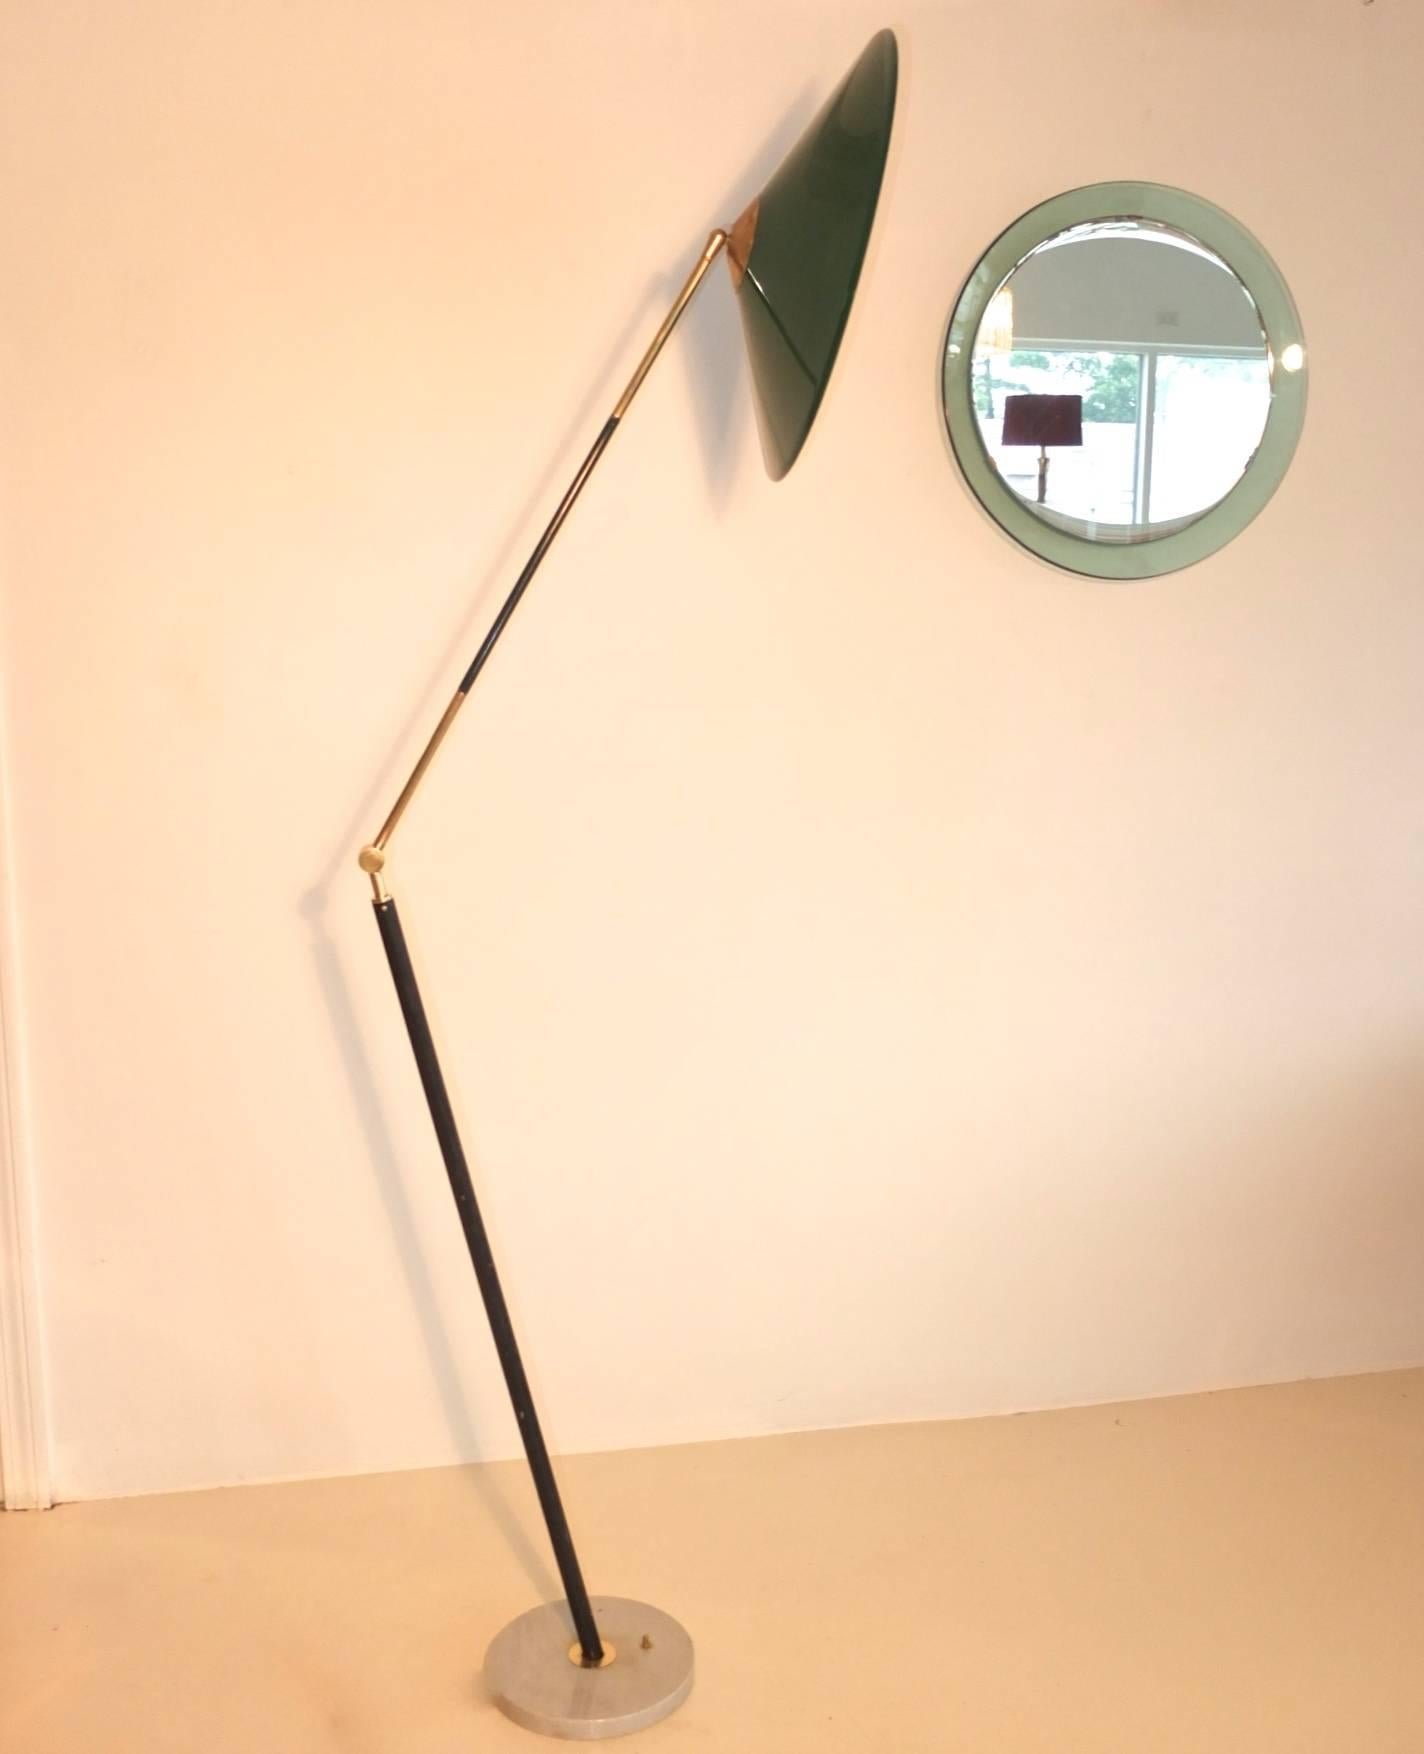 Stilux Milano 1950s floor lamp with distinctive leaning pole, long articulating arm with heavy duty solid brass elbow joint with a radius of over 180 degrees, allowing for some audacious poses. Long upper brass arm segmented by section in